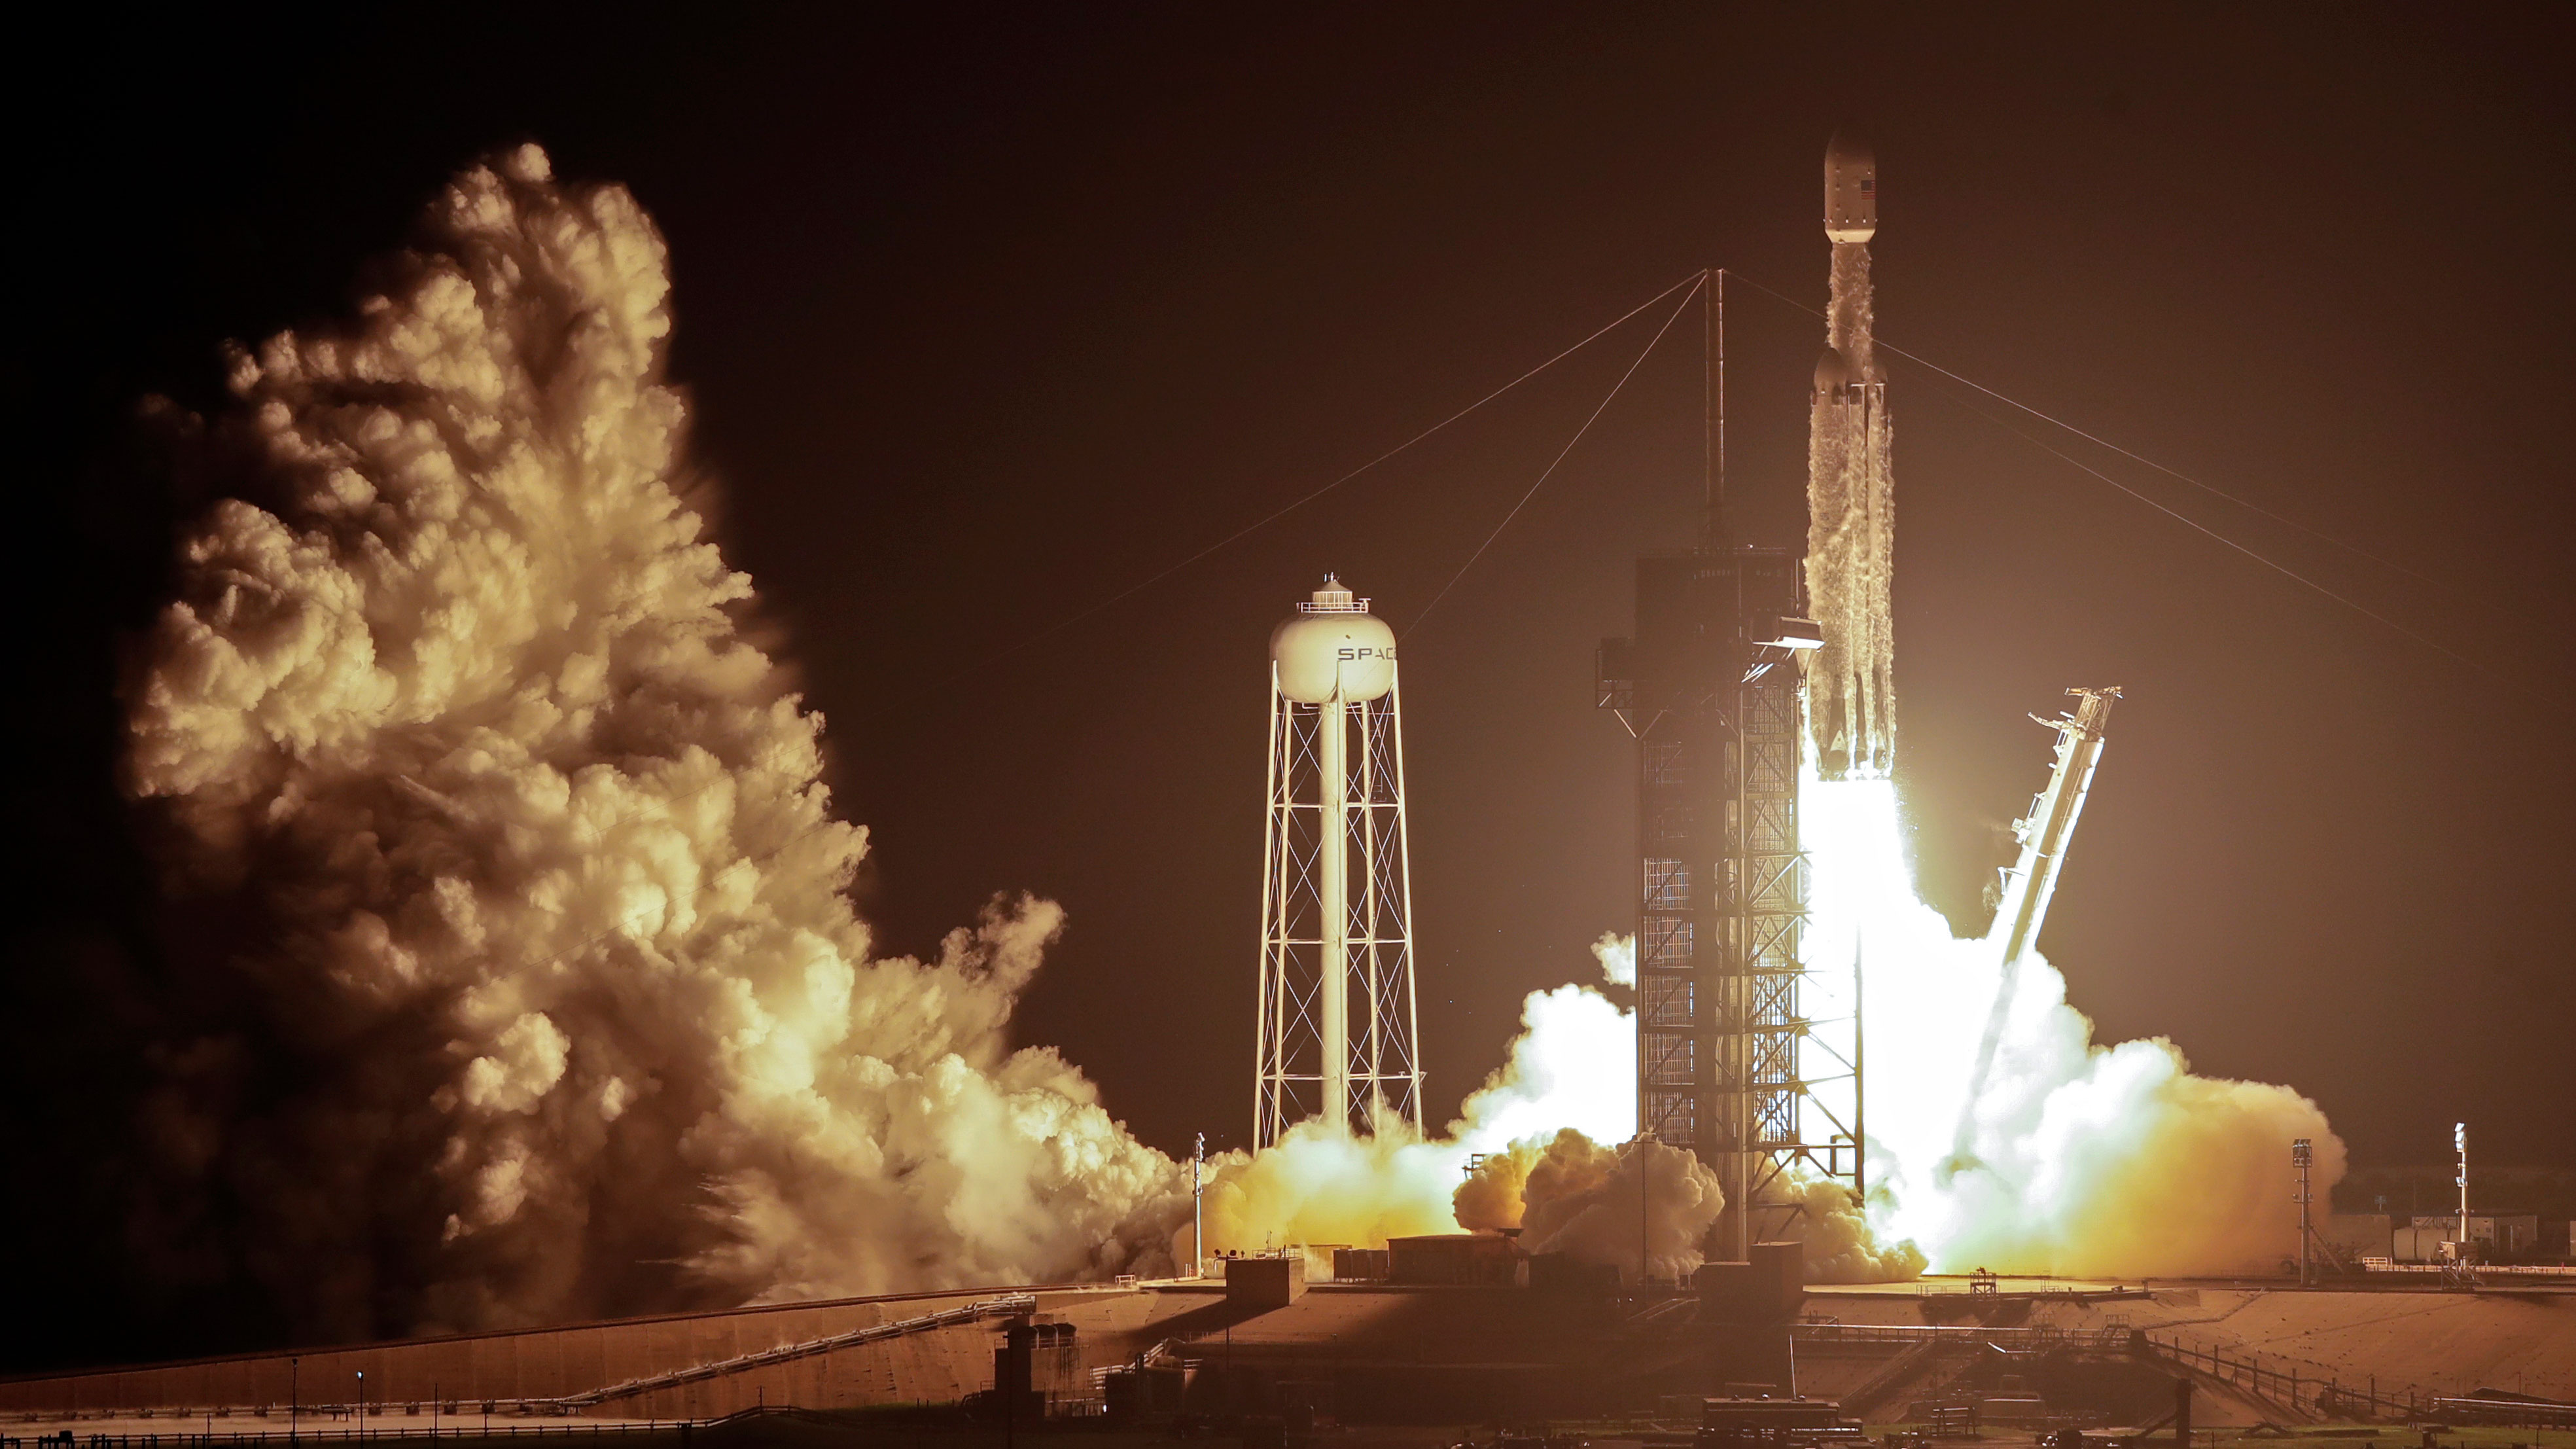 The Falcon rocket blasts off from Cape Canaveral